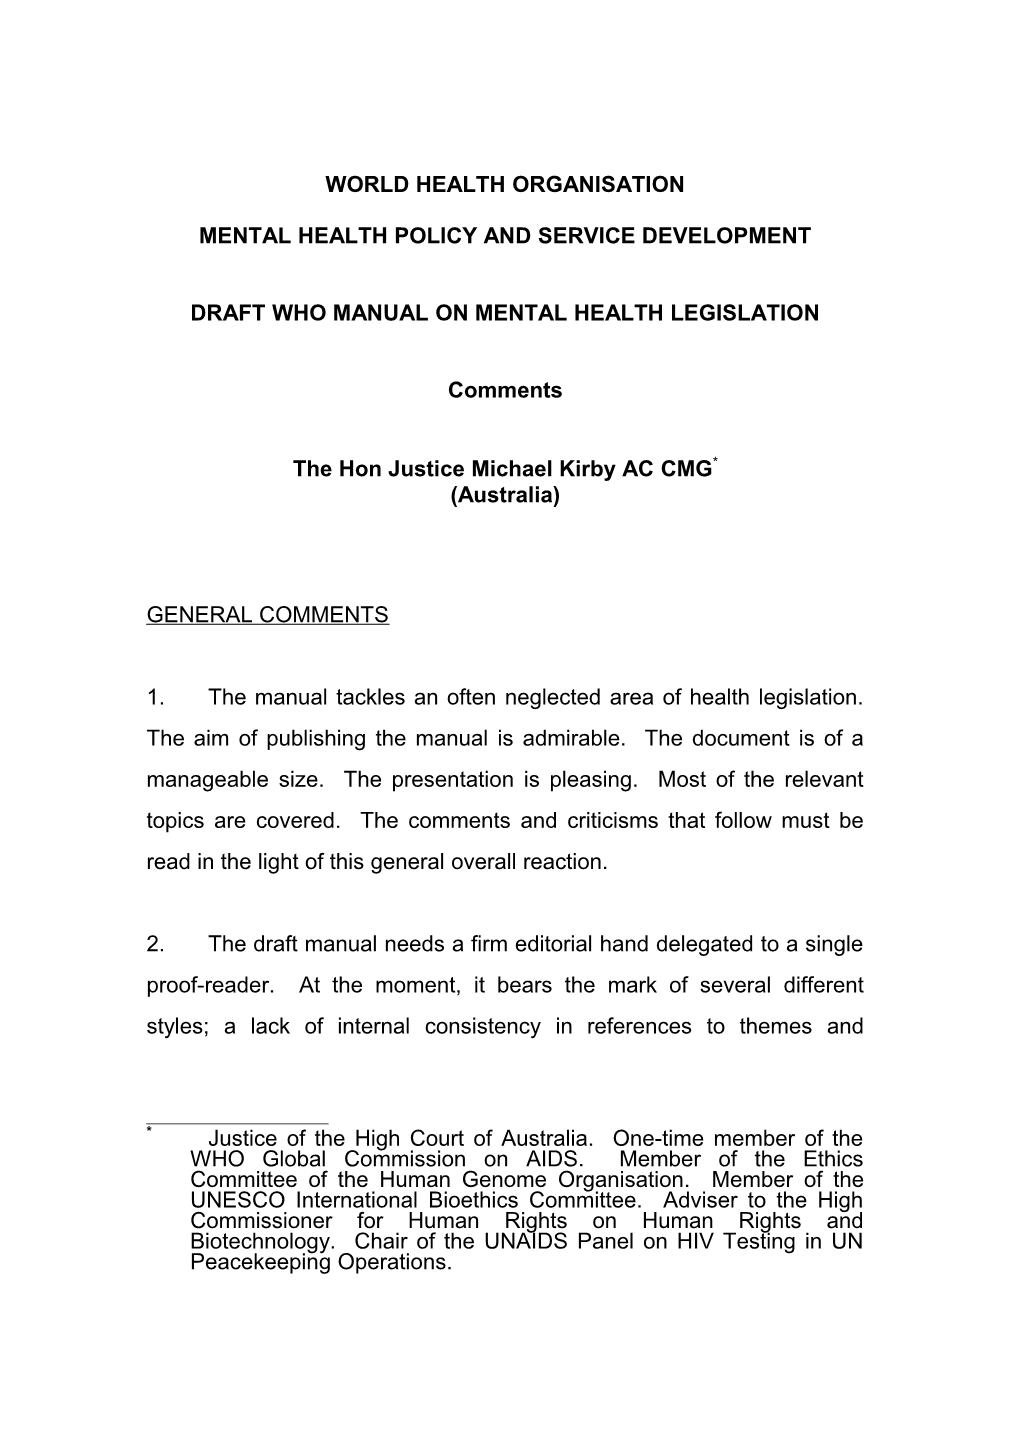 Mental Health Policy and Service Development